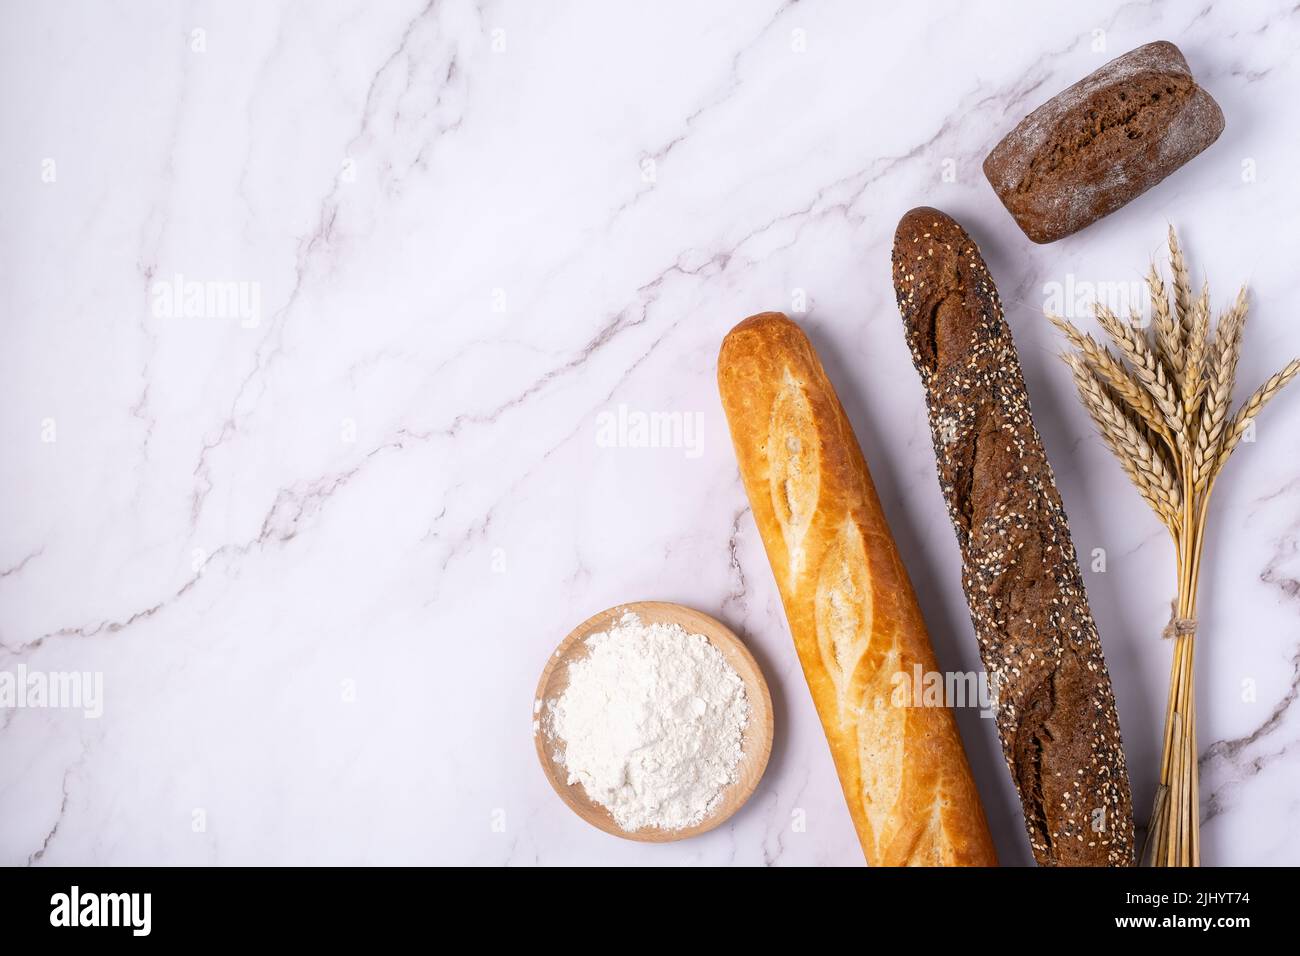 Bakery - various kinds of breadstuff. Bread rolls, baguette, croissant and flour Stock Photo